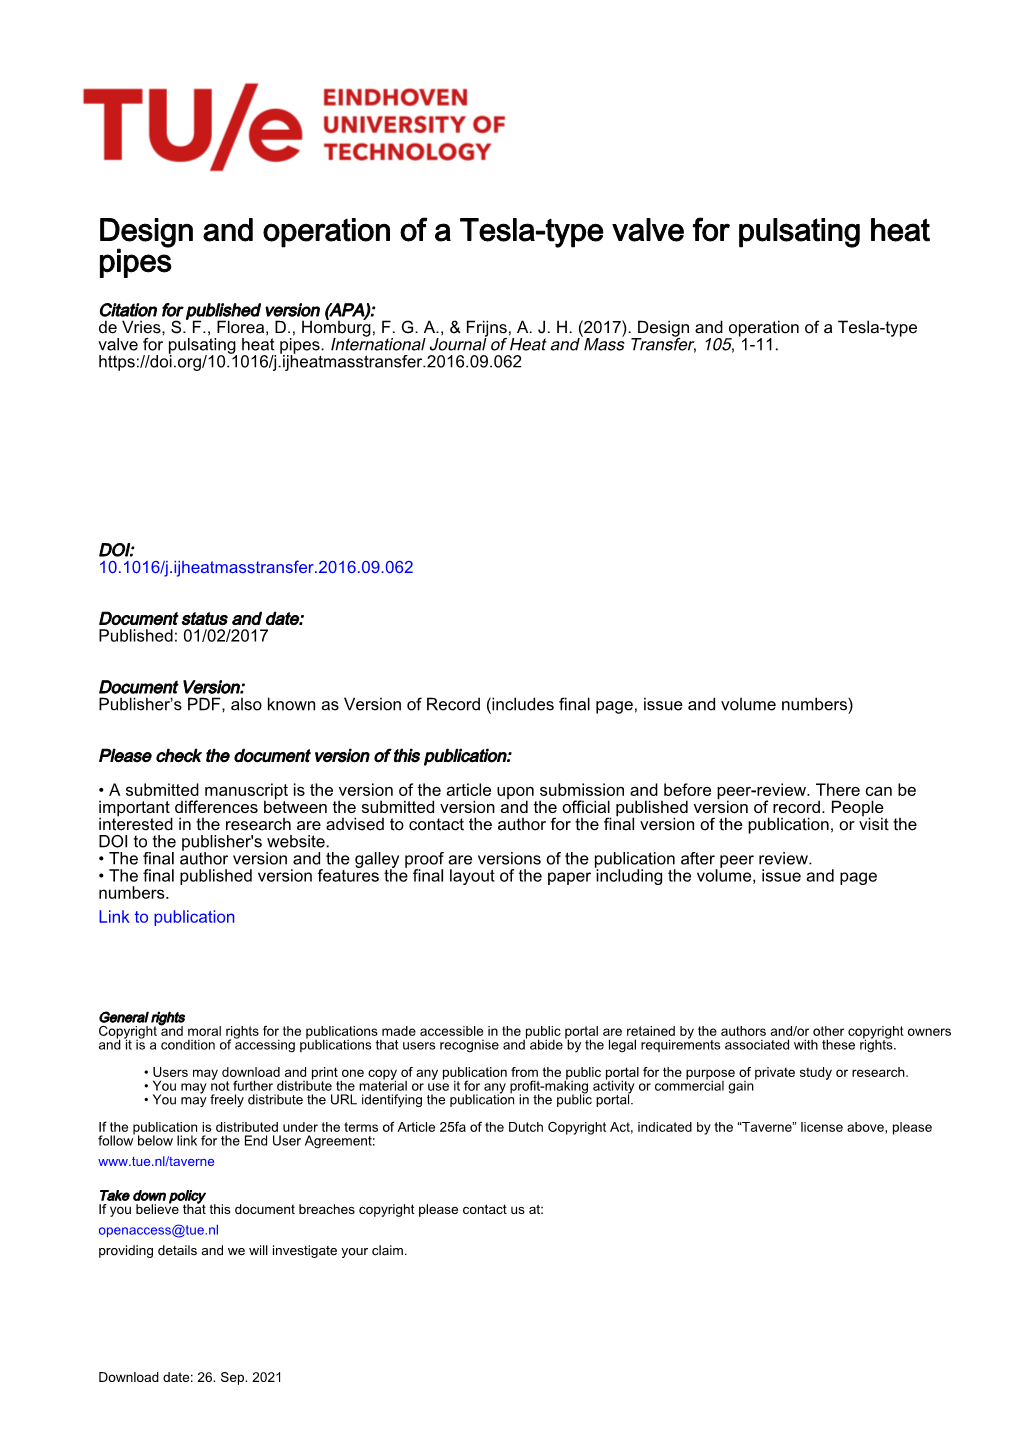 Design and Operation of a Tesla-Type Valve for Pulsating Heat Pipes